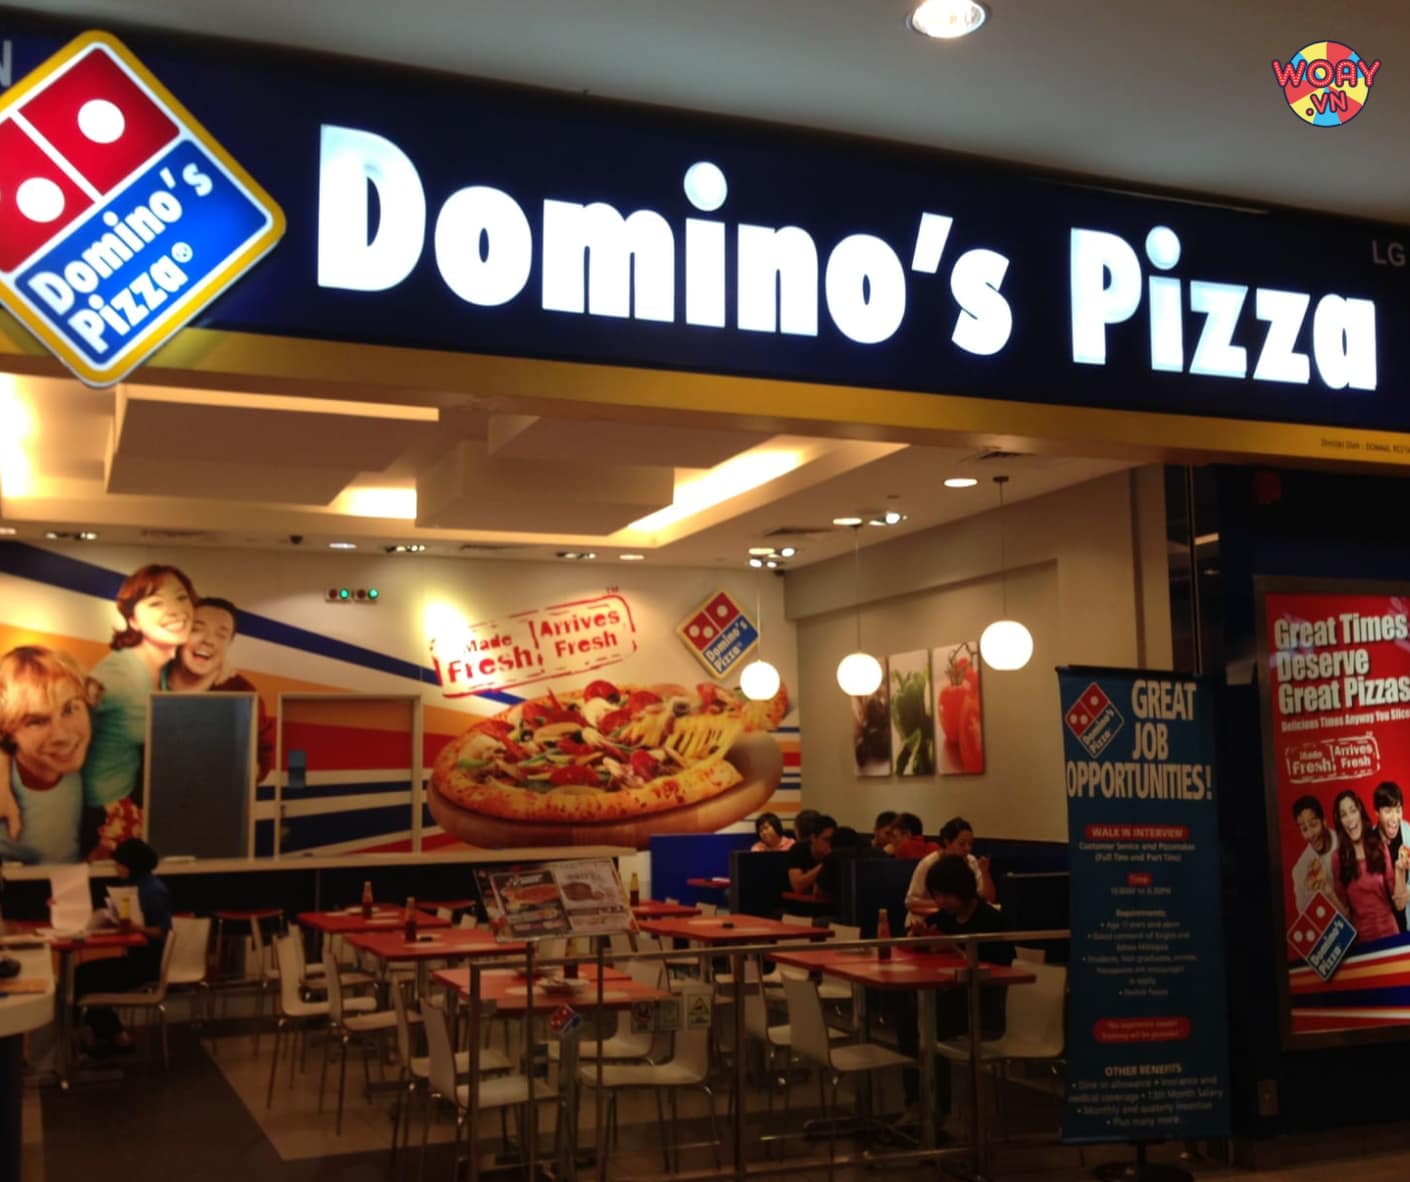 domino-s-pizza-tung-ung-dung-gamification-rat-thanh-cong